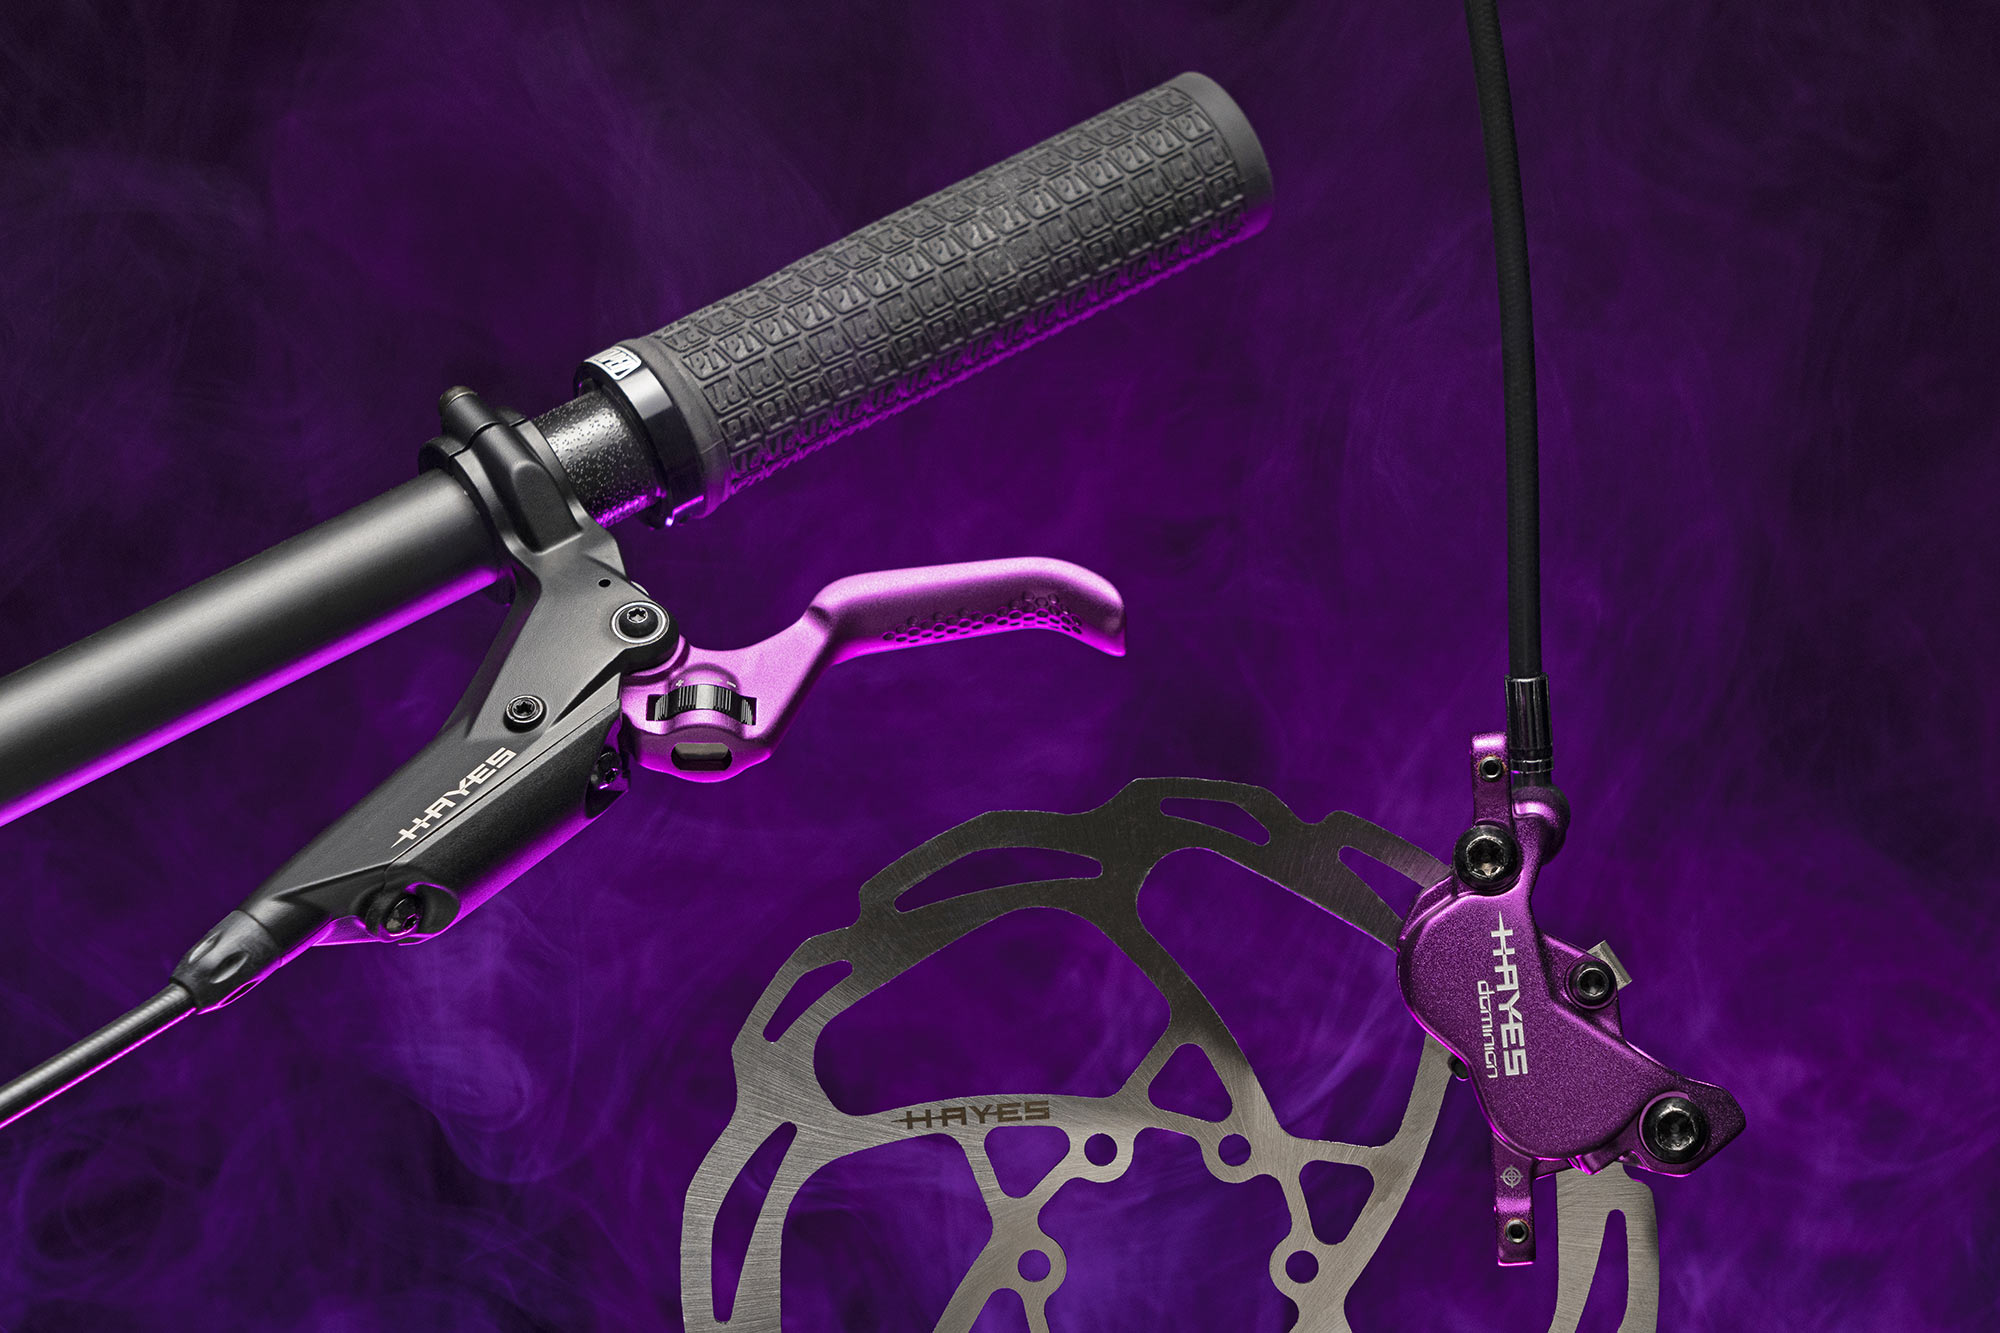 A Purple Haze: Hayes Brings Back Purple Ano for Limited Edition Dominion A4  Disc Brakes - Bikerumor